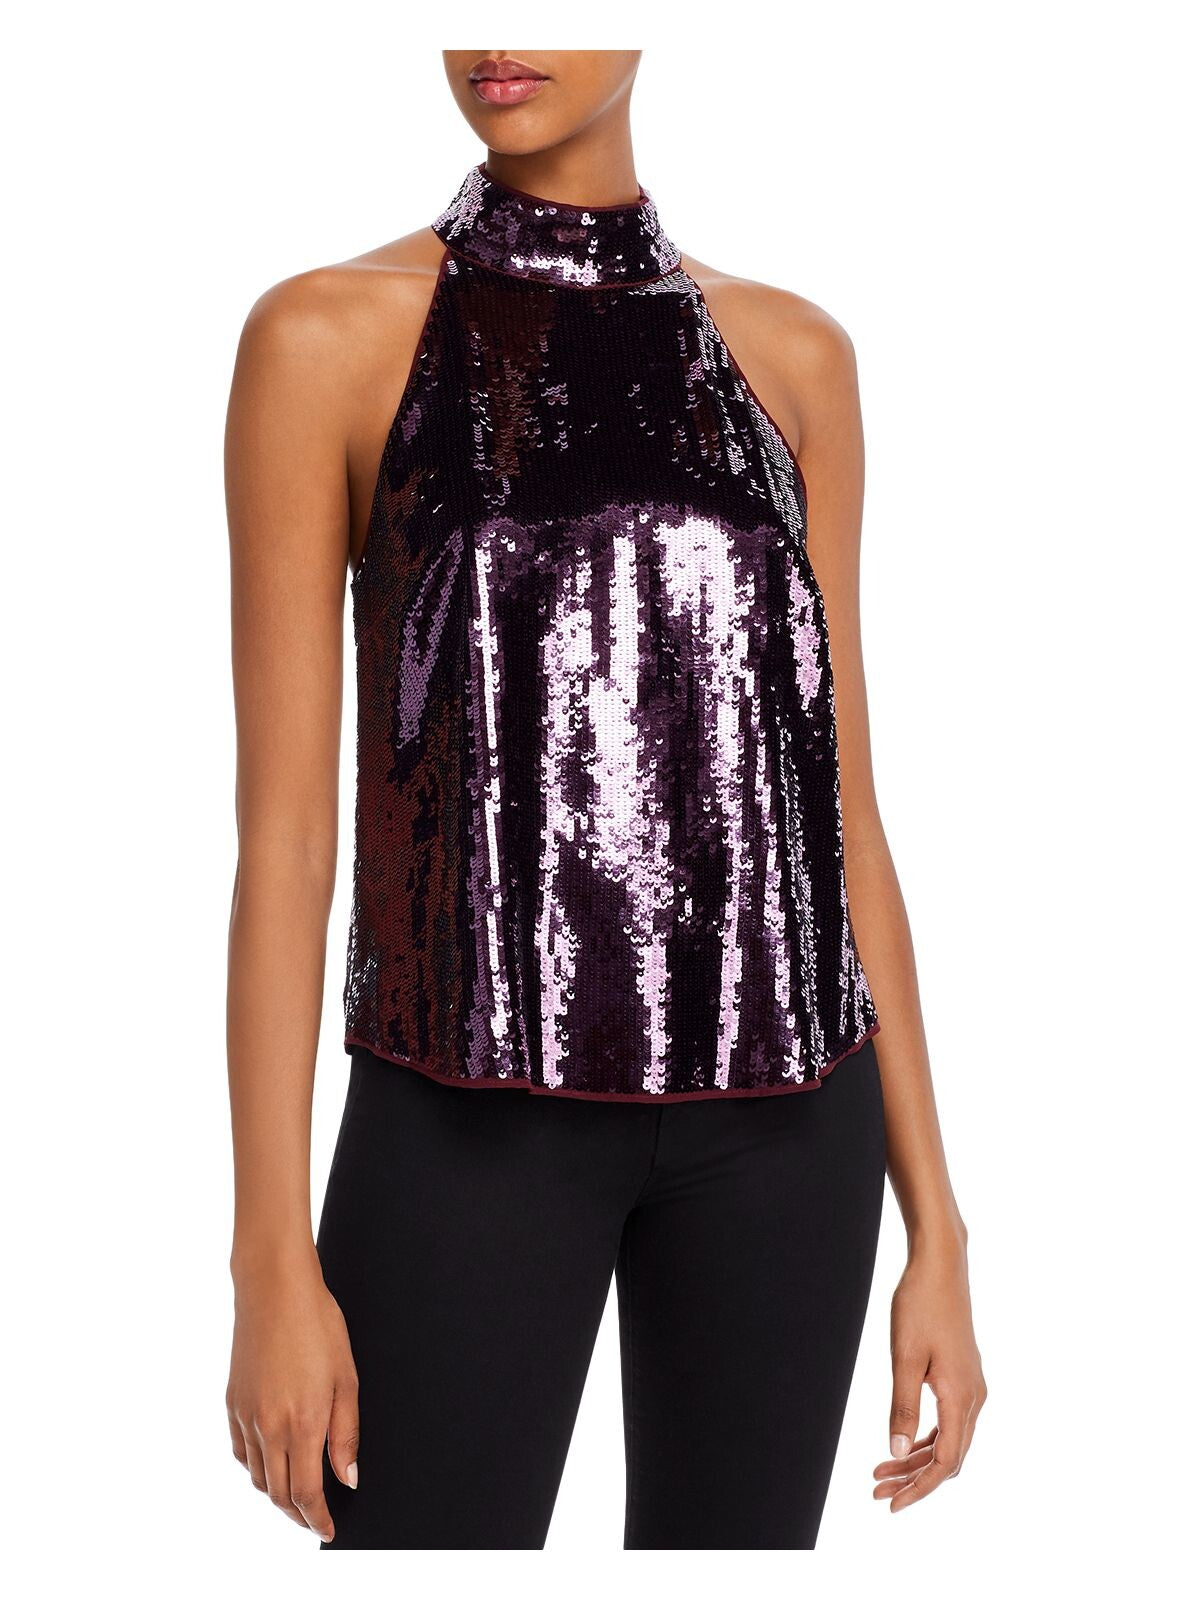 JOIE Womens Purple Sequined Sleeveless Halter Party Top XXS